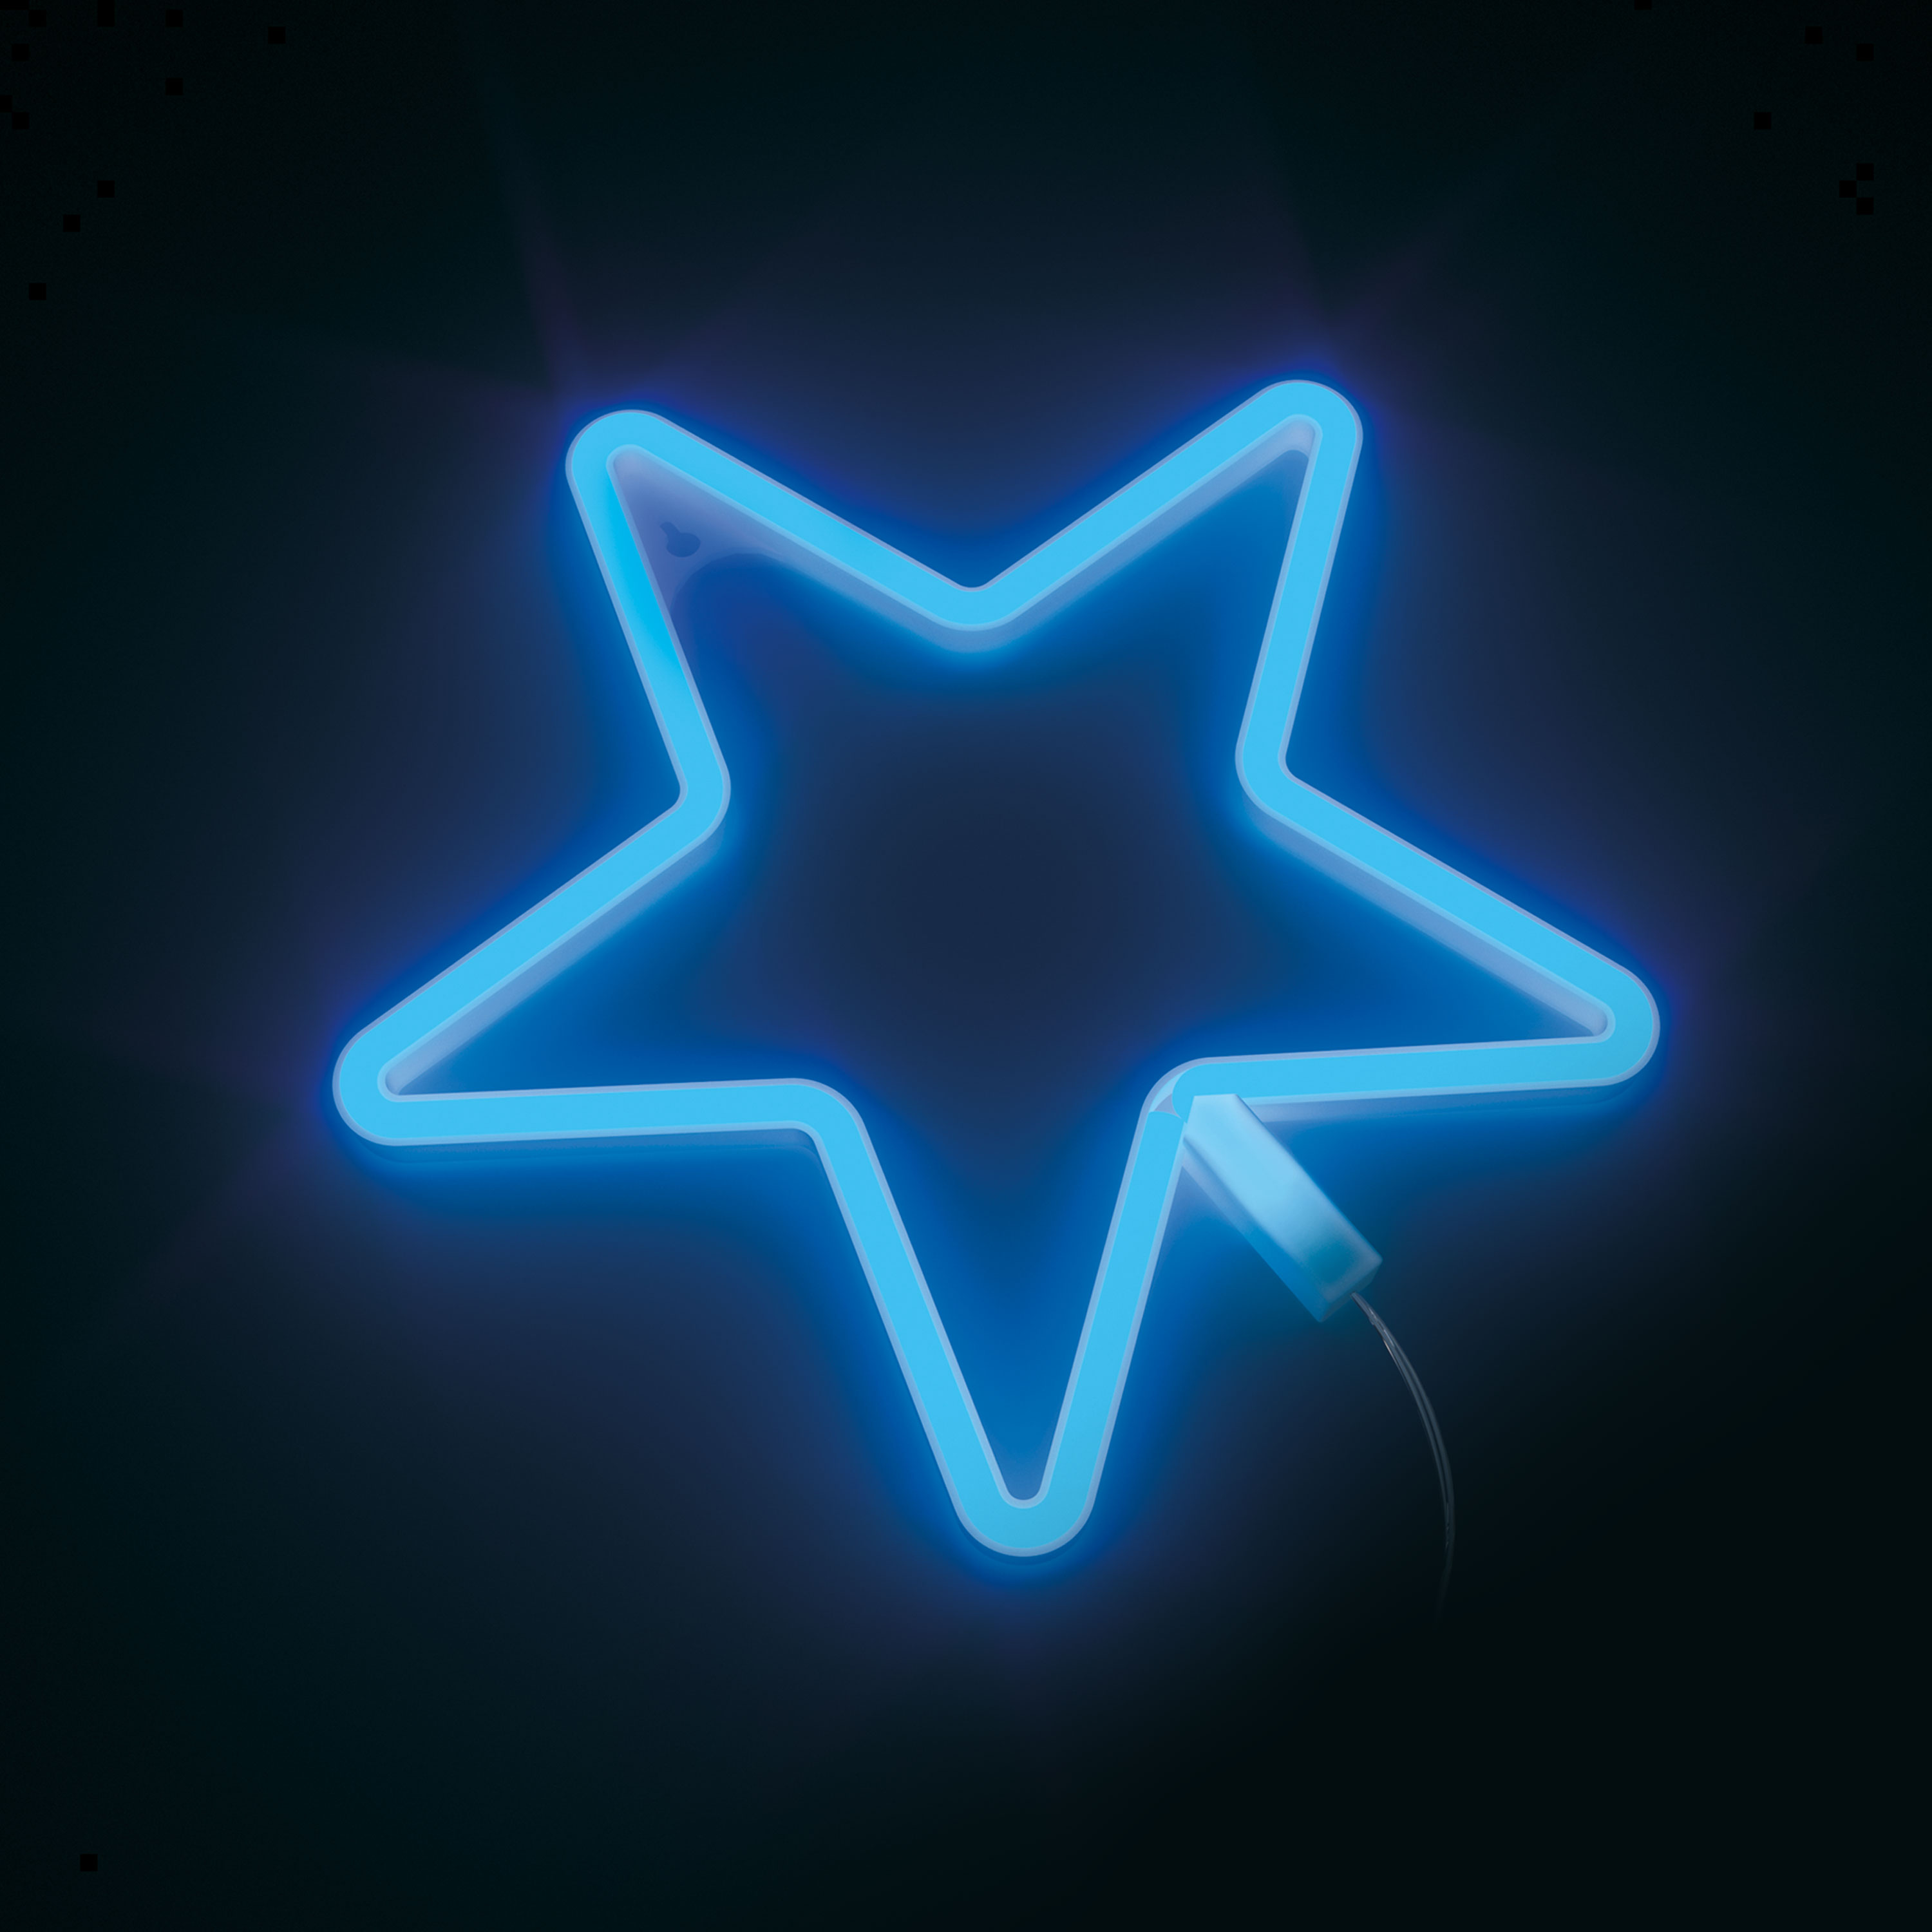 Atomi Neon LED Hanging Wall Art Star - Blue - image 4 of 6